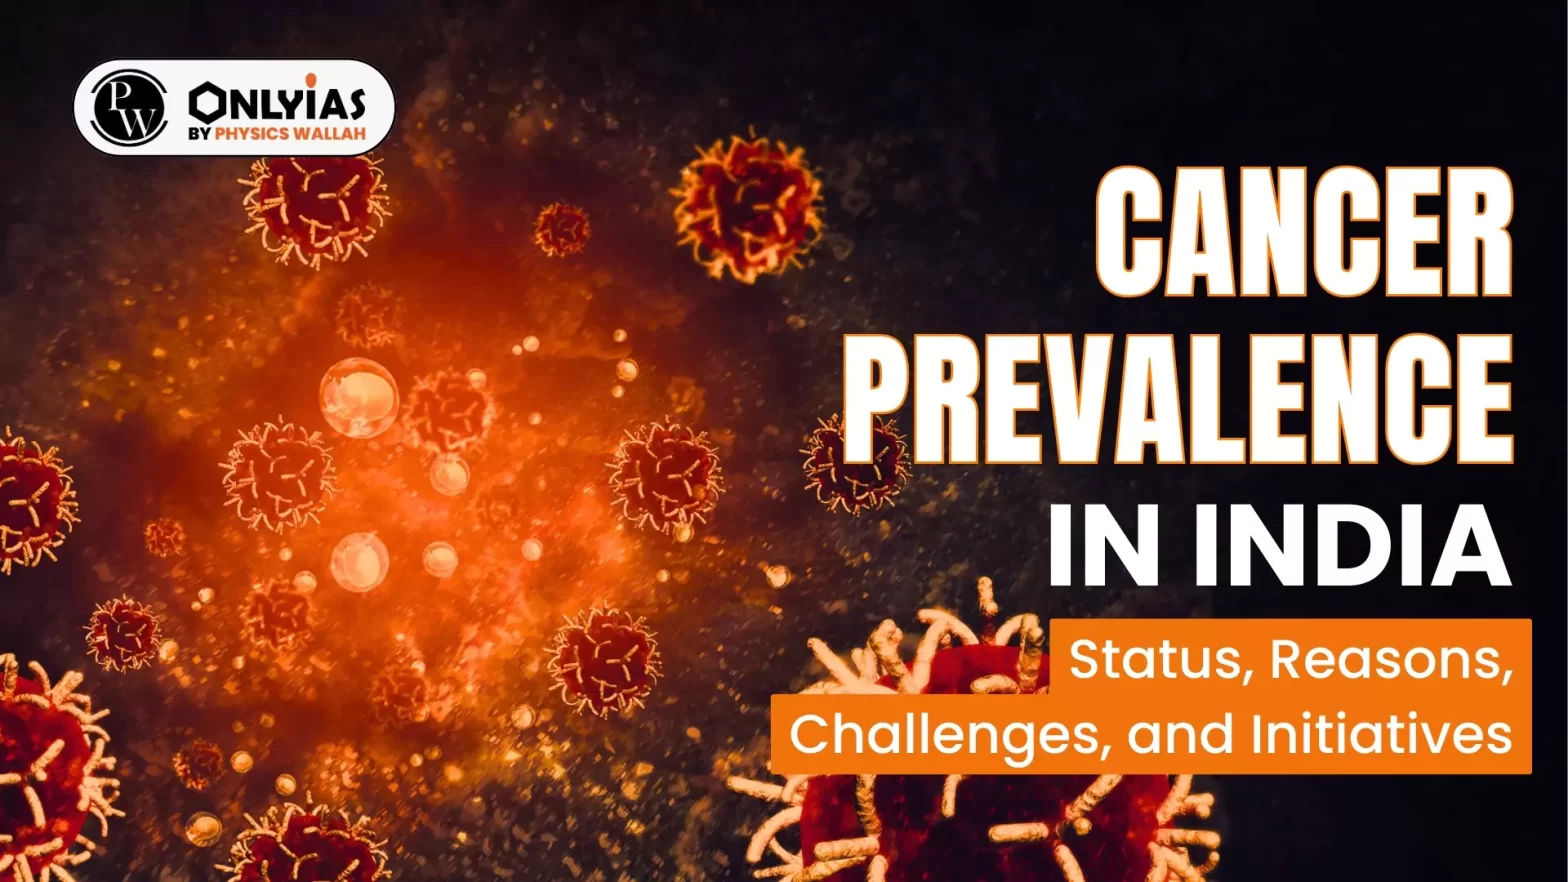 Cancer Prevalence in India: Status, Reasons, Challenges, and Initiatives